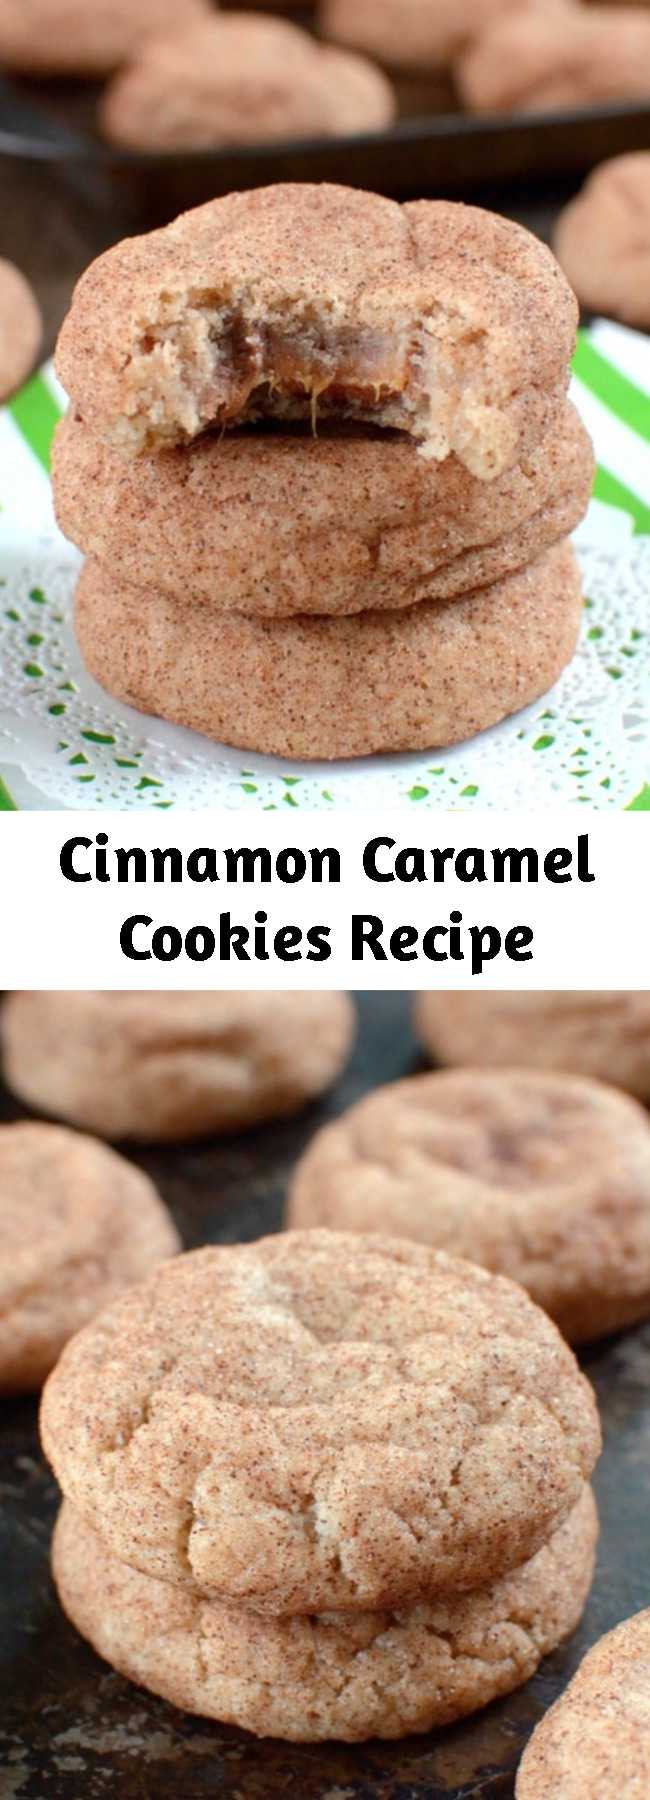 Cinnamon Caramel Cookies Recipe - These hidden candy center in these Cinnamon Caramel Cookies will make everyone smile when they find it. Fill your cookie jar with a batch today!